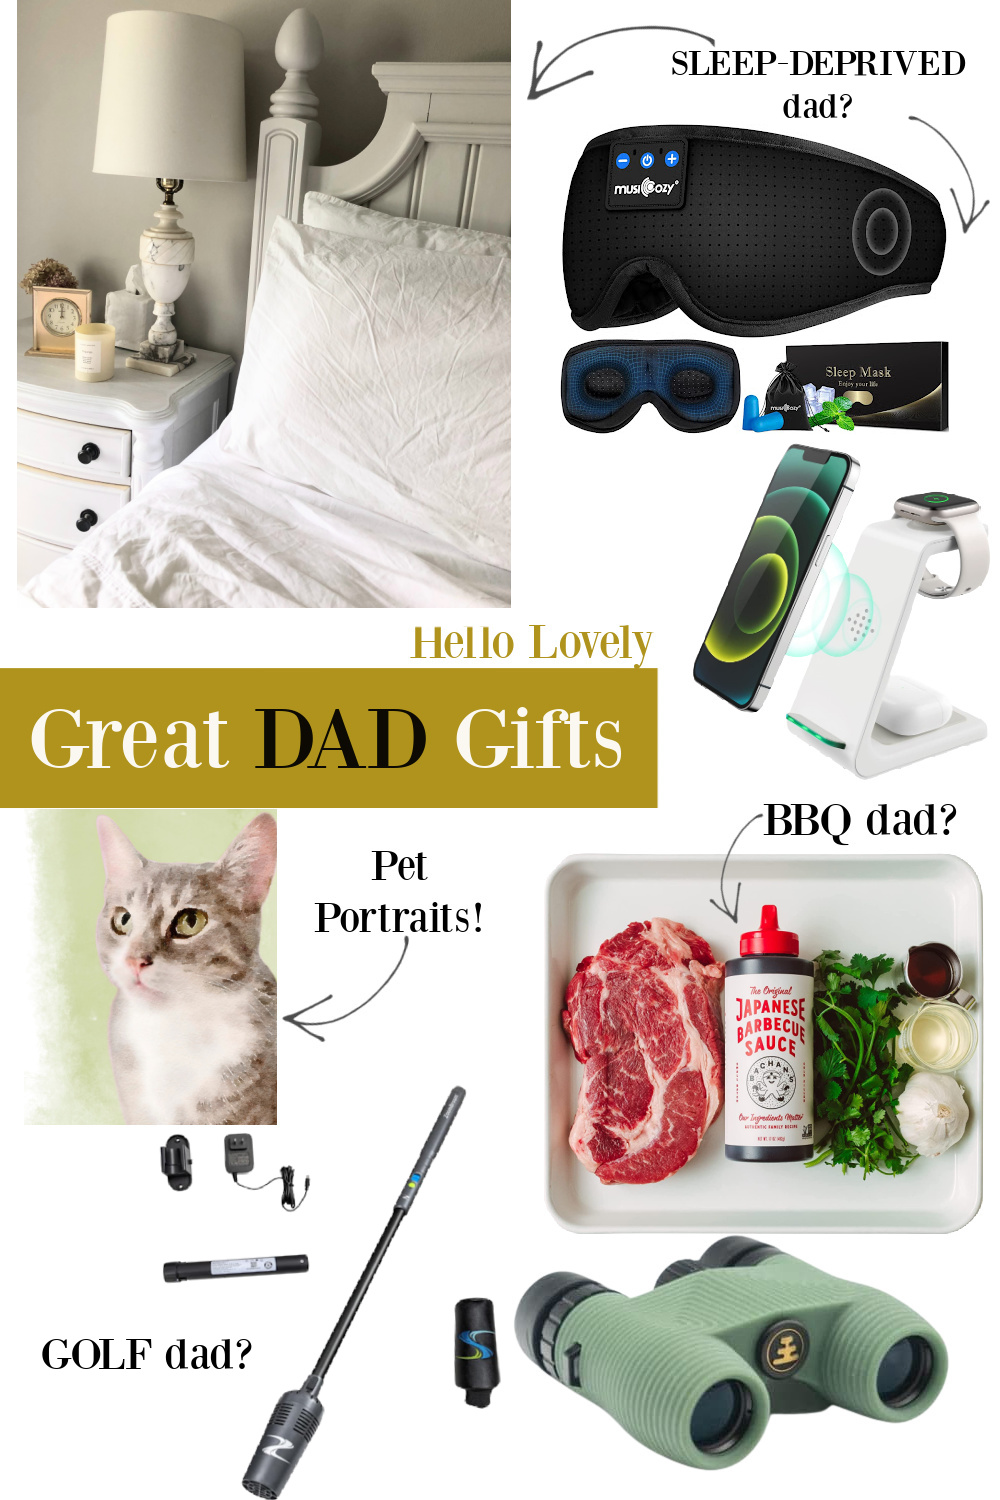 Great dad gifts for Father's Day on Hello Lovely Studio. #giftguides #fathersdaygifts